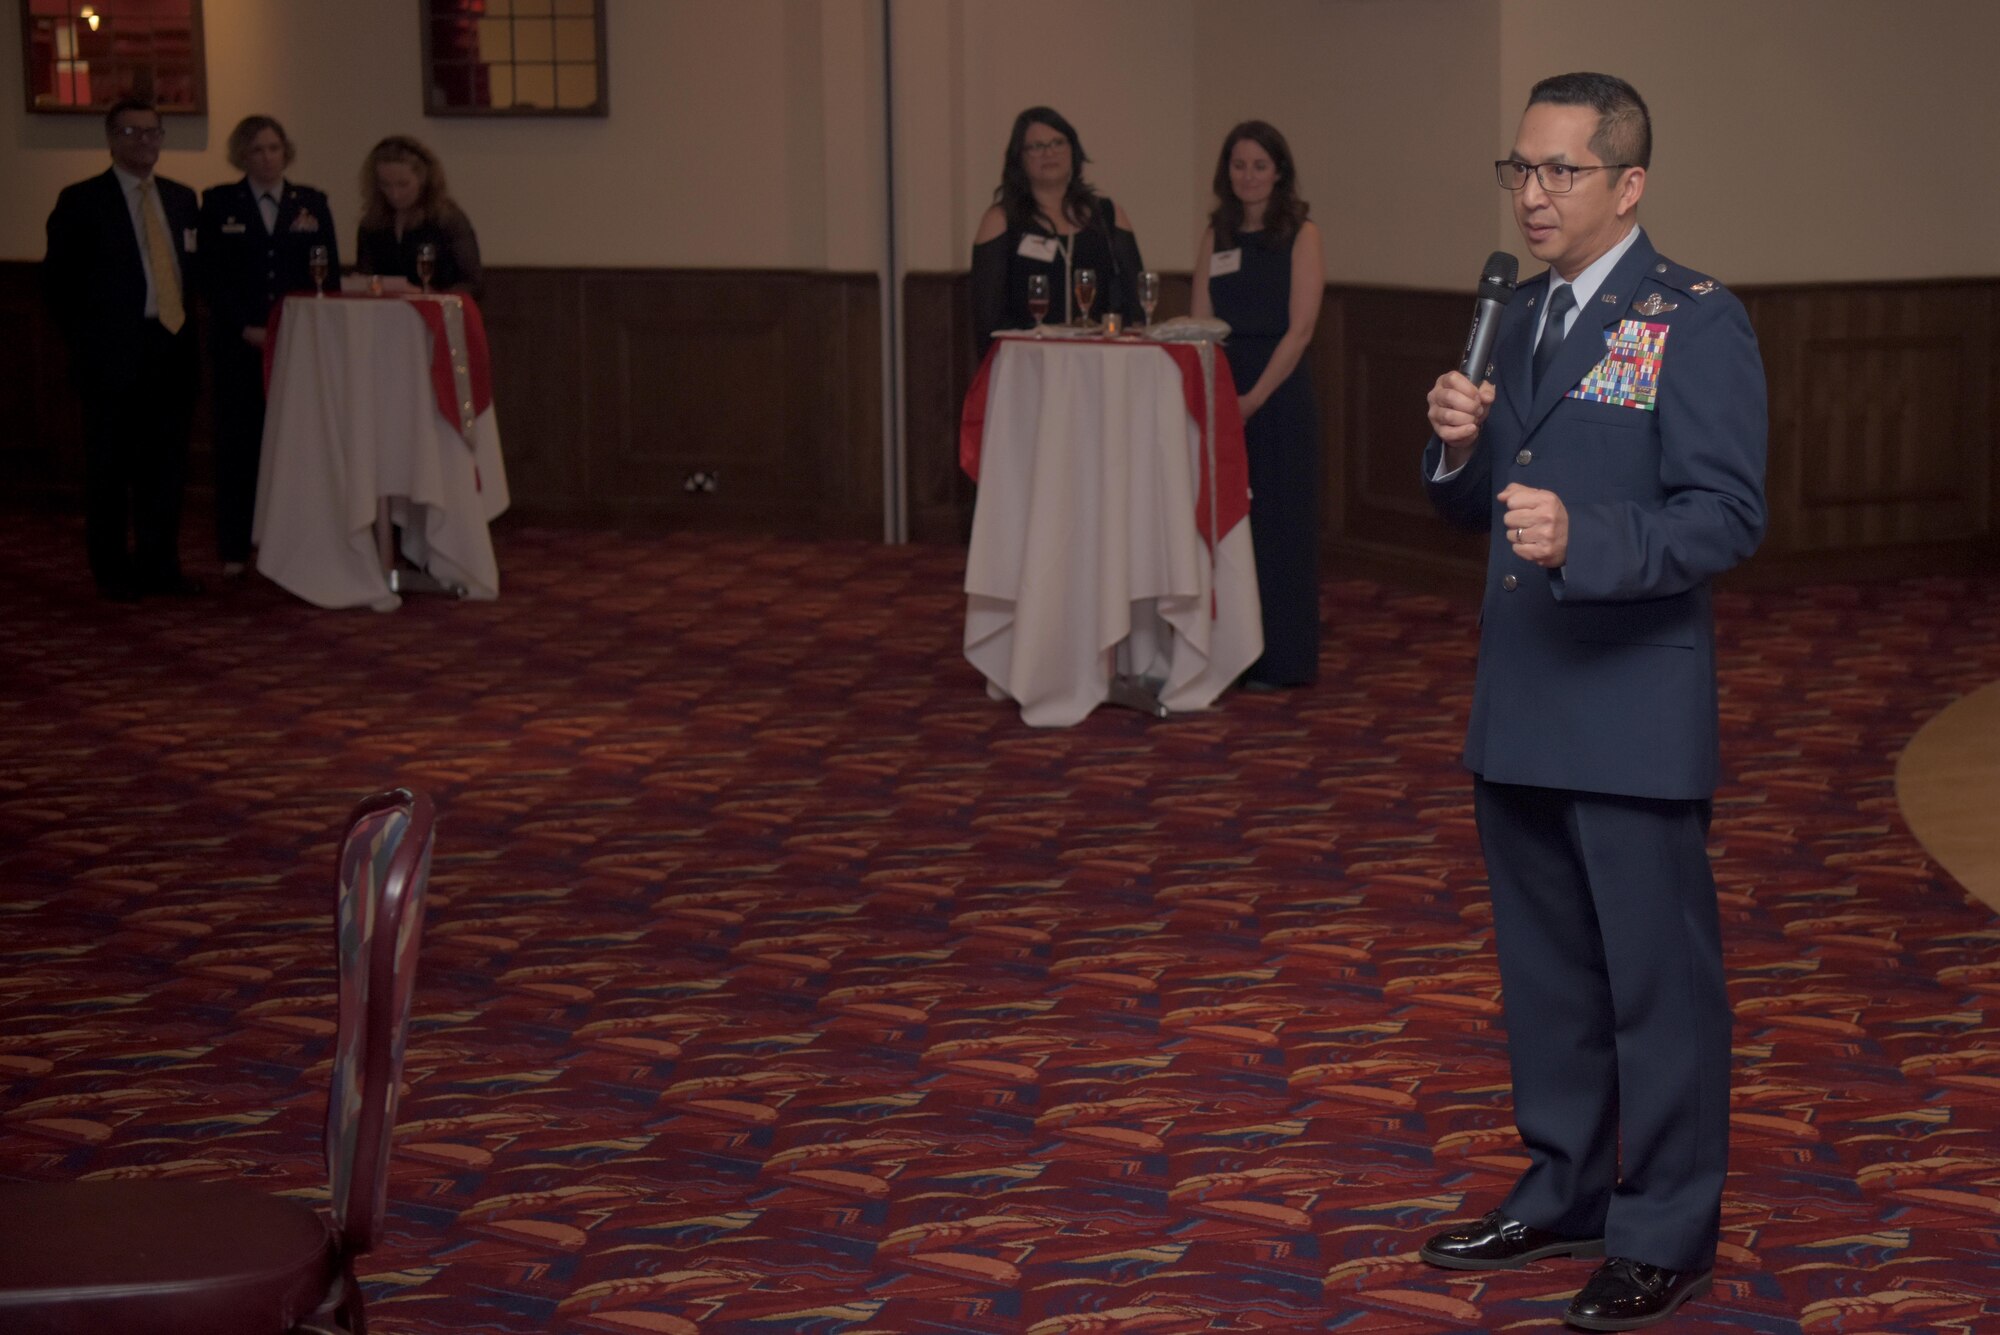 Col. Troy Pananon, 100th Air Refueling Wing commander, gives opening remarks to Airmen and community leaders during the 2019 Yuletide Reception at the Galaxy Club, RAF Mildenhall, Dec. 6, 2019. Events such as the Yuletide reception help build trust and friendship between the the U.S. military and  local leaders  who represent their communities. (U.S. Air Force photo by Senior Airman Benjamin Cooper)